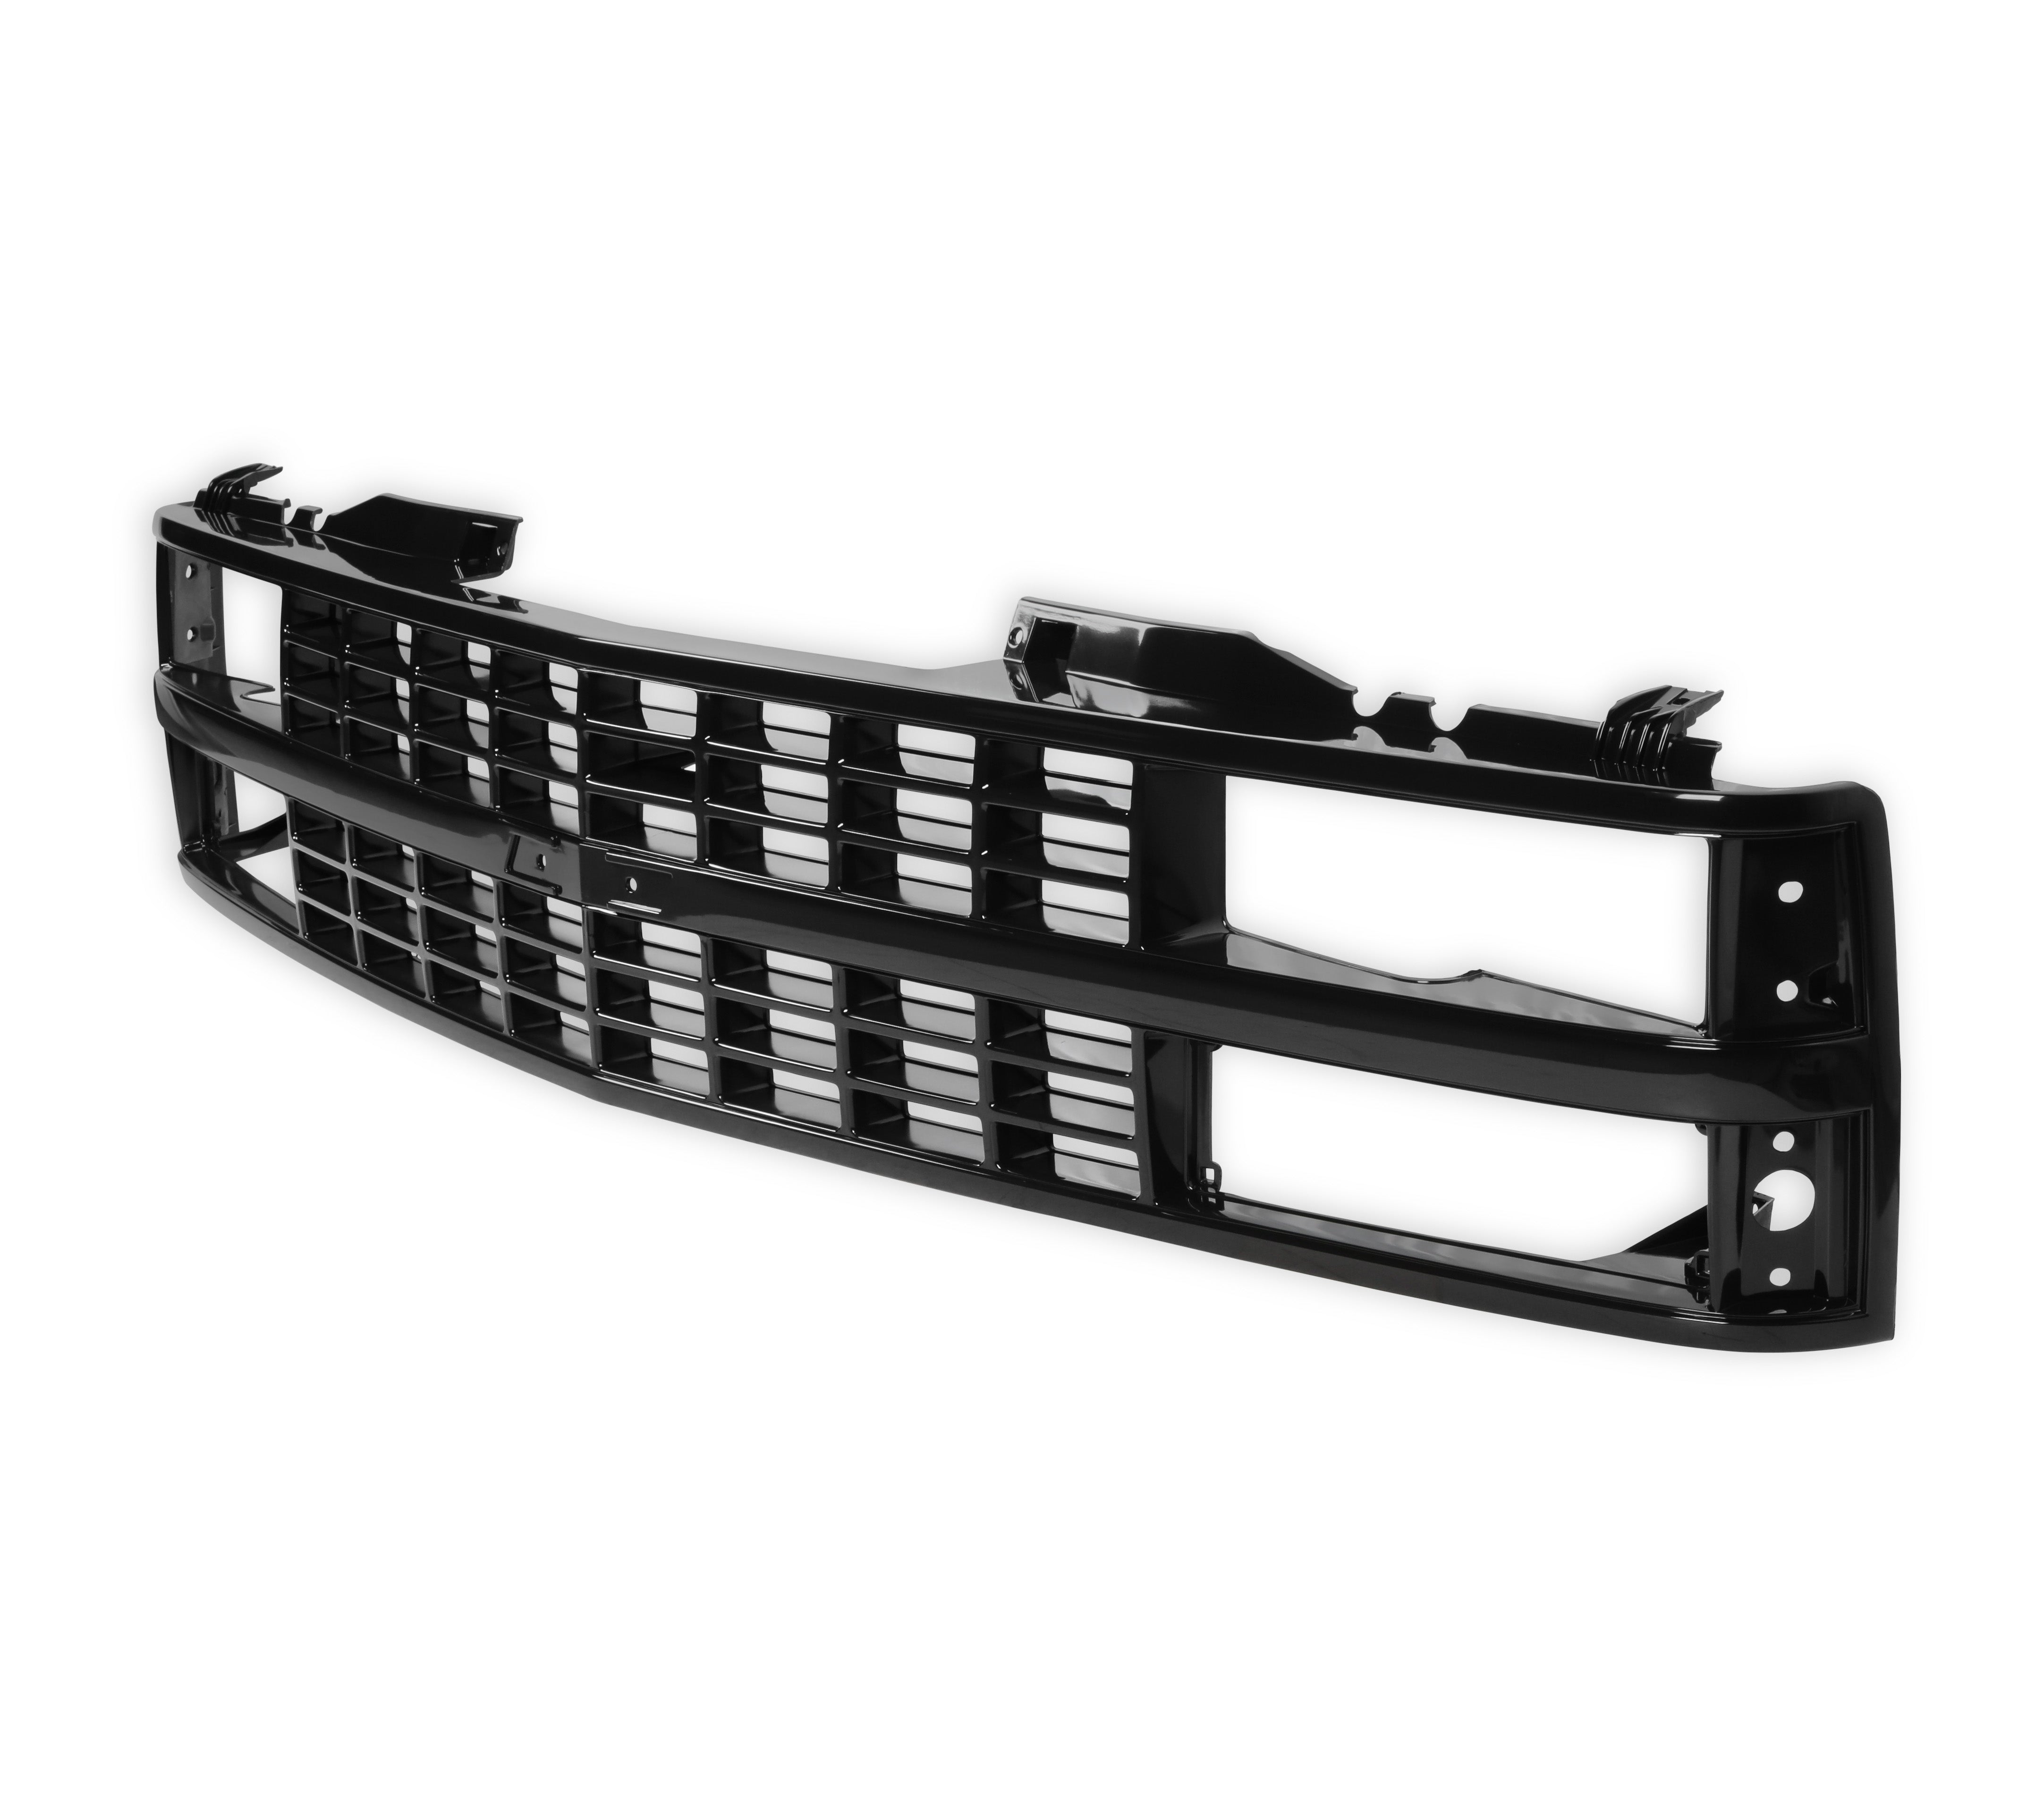 BROTHERS GMT400 Chevy Grille - Dual Headlight - Black pn 04-365